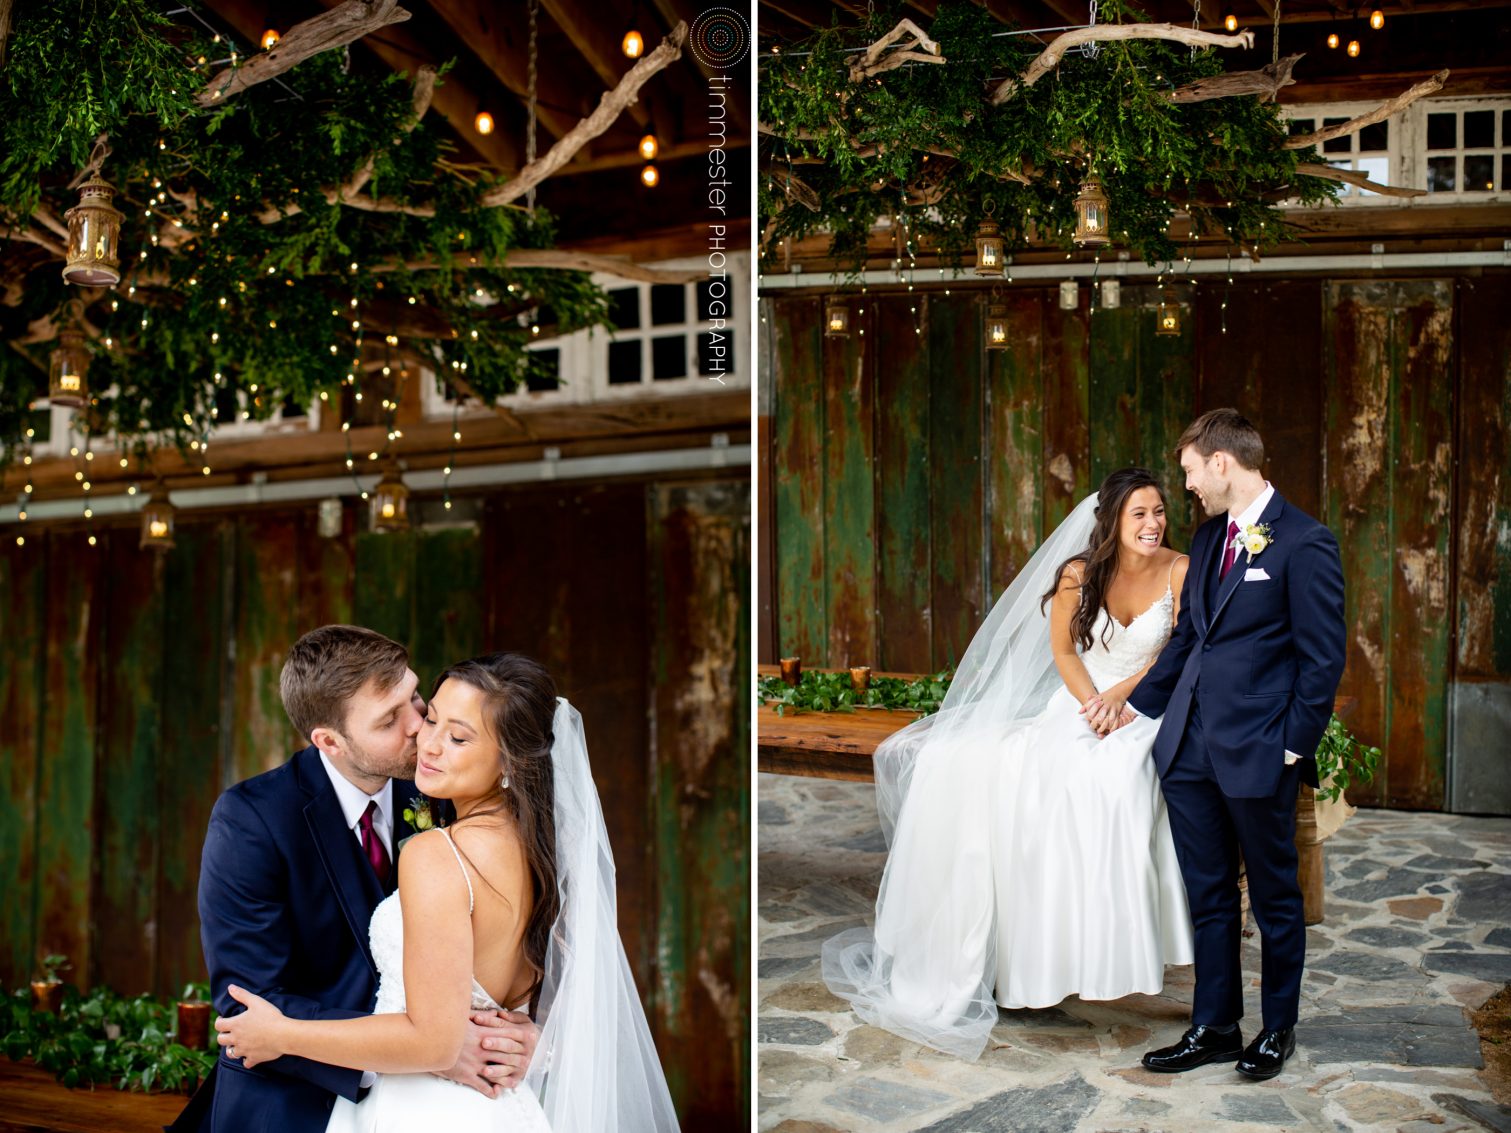 A wedding day and bride and groom portraits at Sassafras Fork Farm.